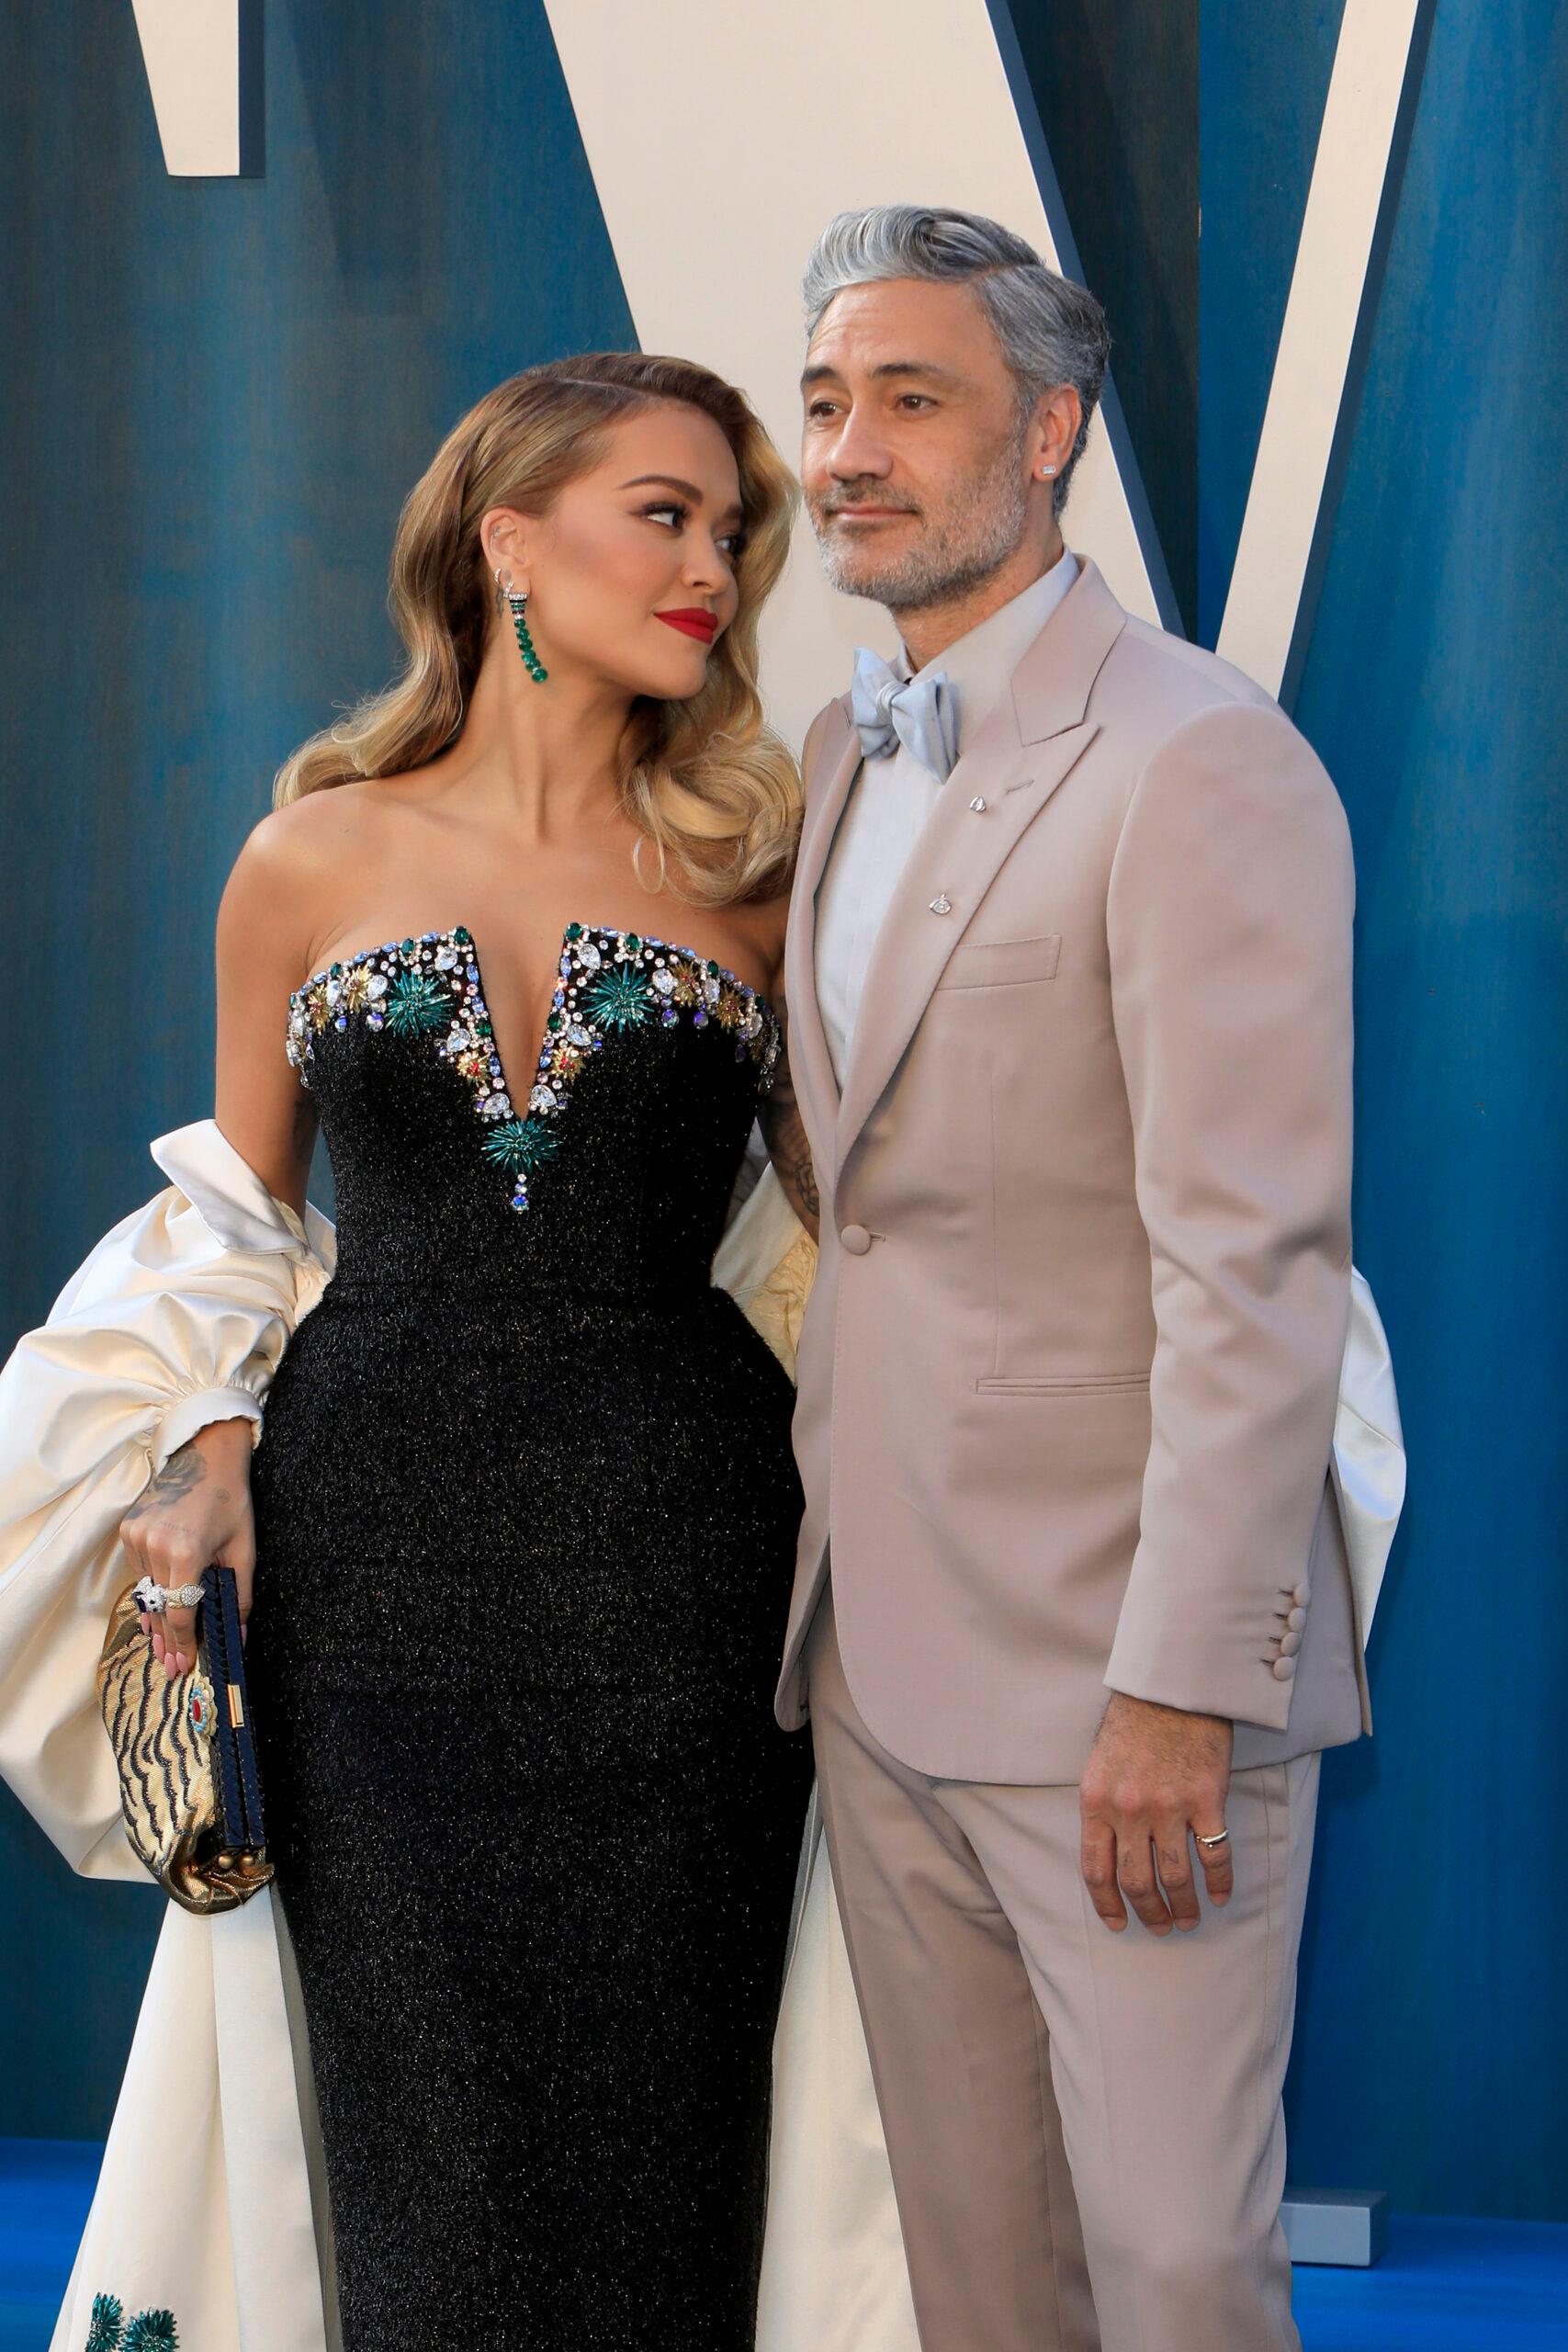 Taika Waititi, Rita Ora at the Vanity Fair Oscar Party at Wallis Annenberg Center for the Performing Arts on March 27, 2022 in Beverly Hills, CA